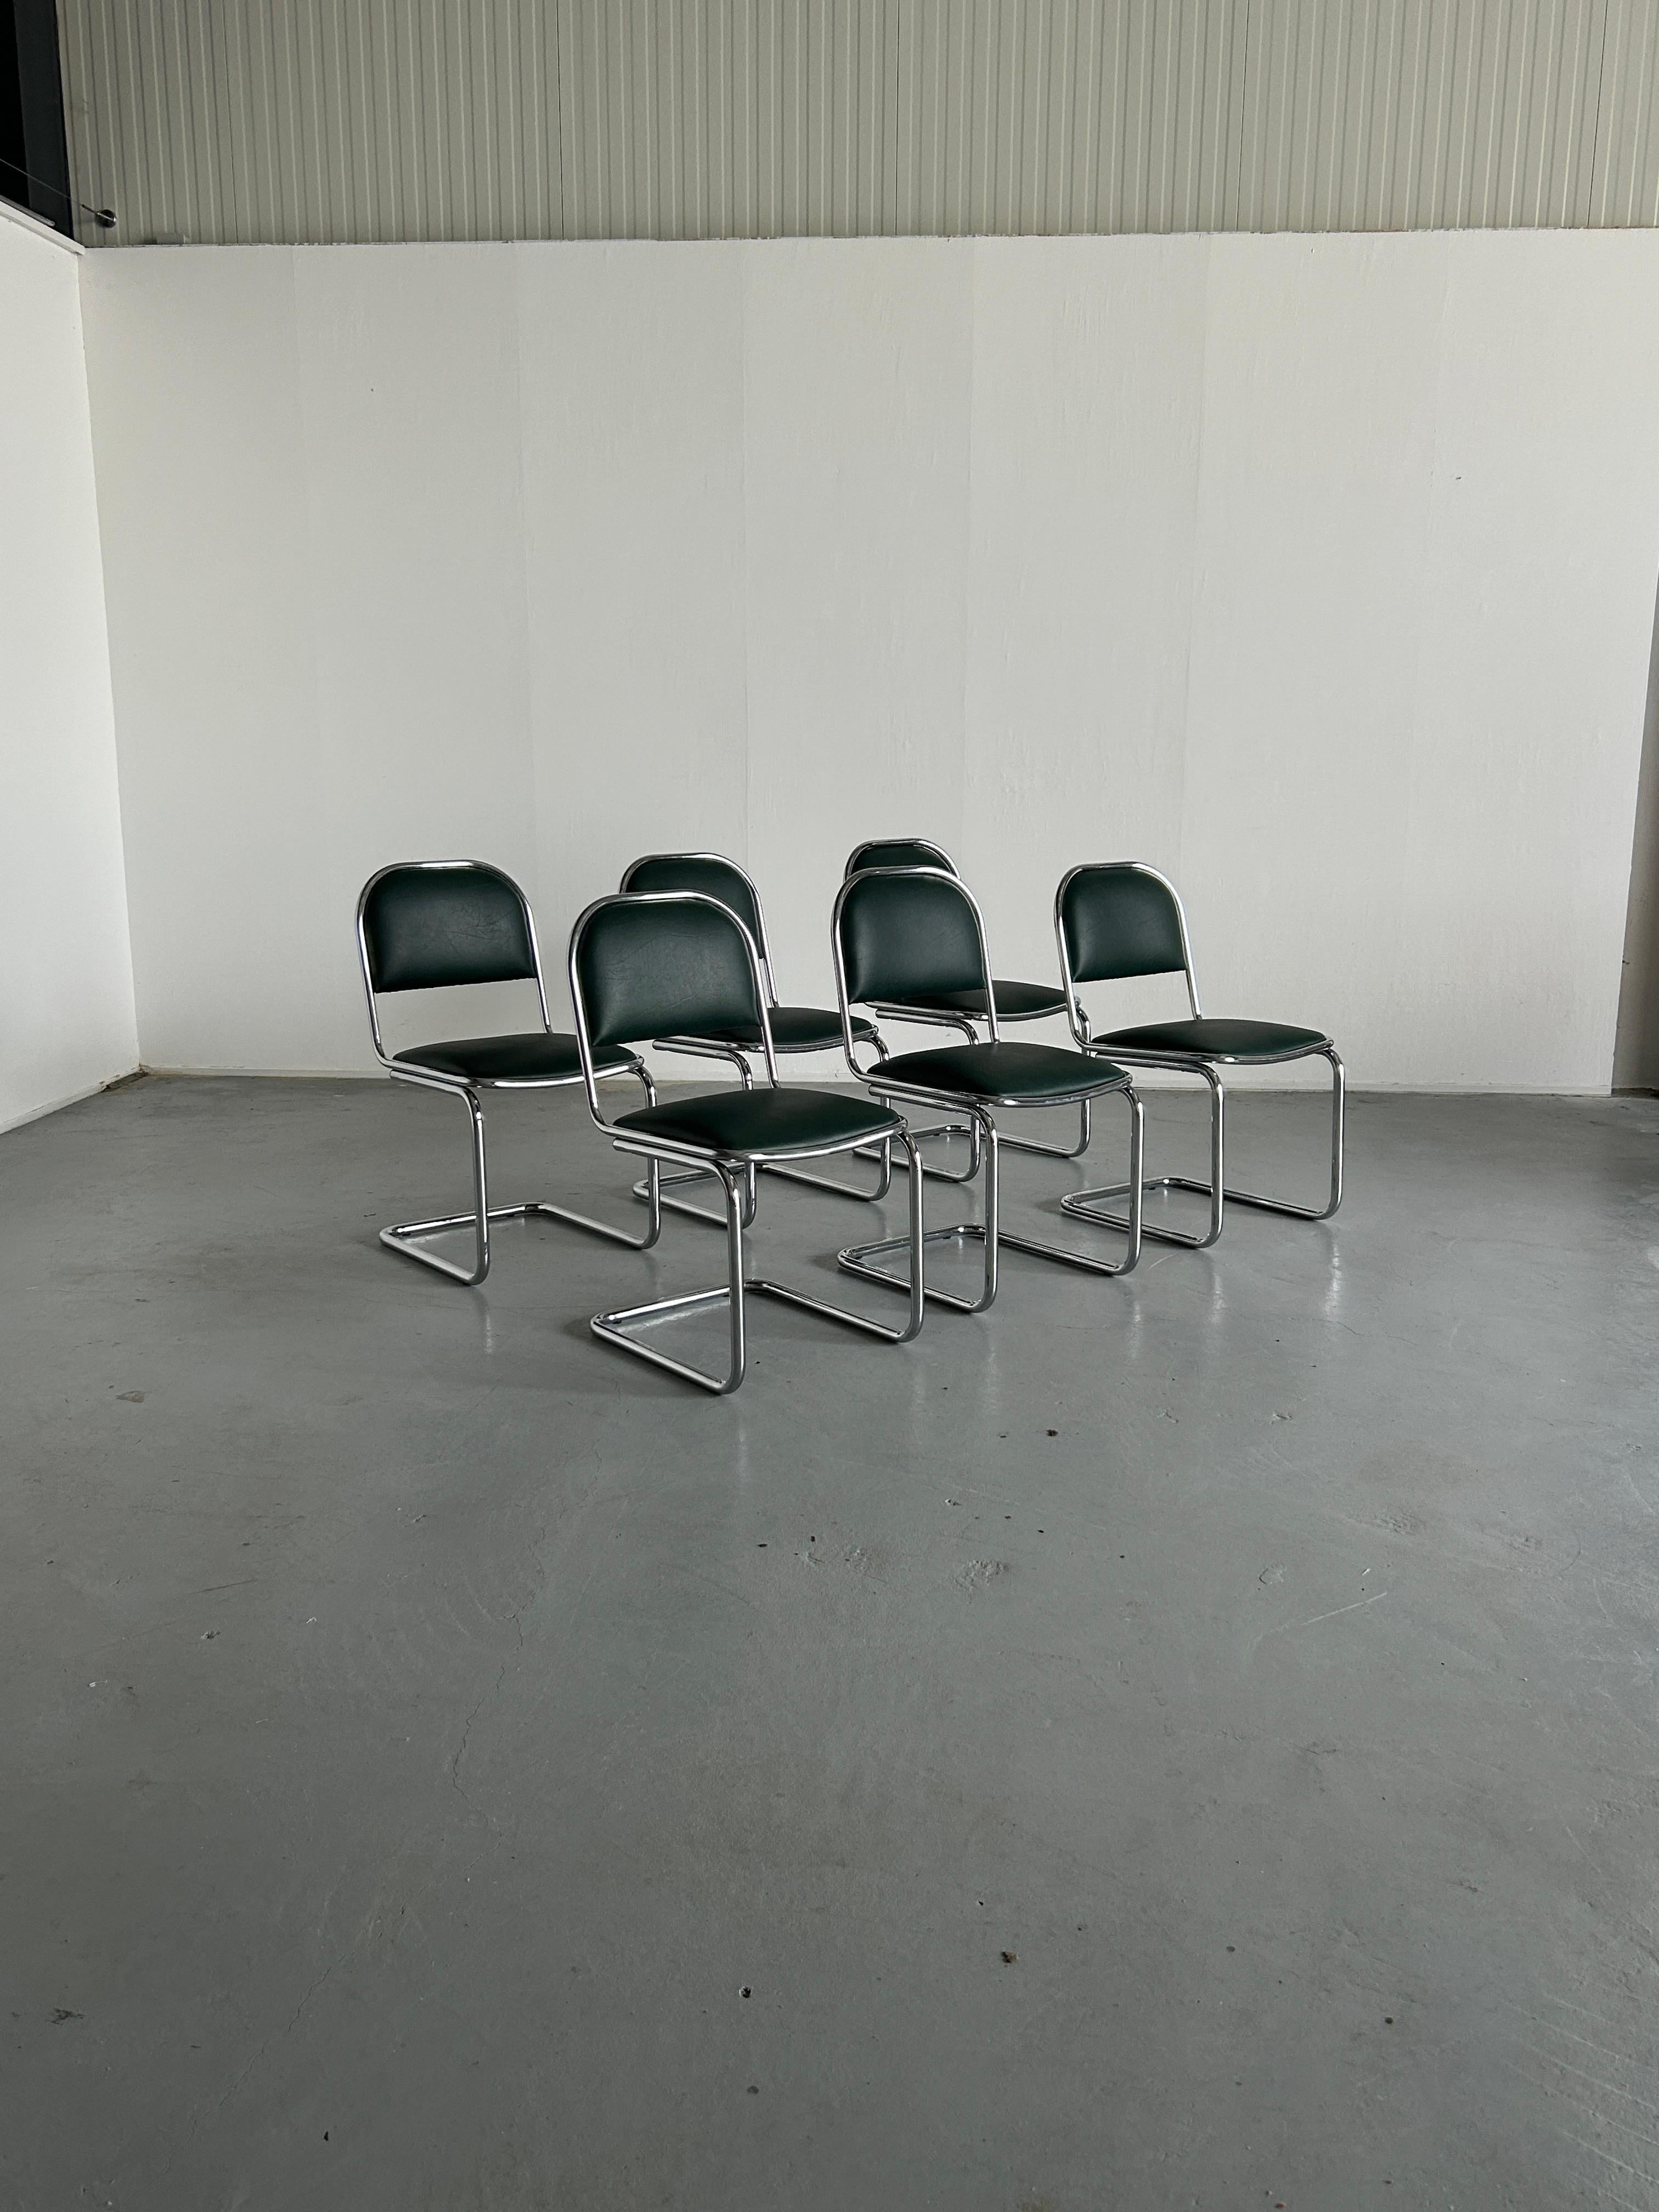 Beautiful Bauhaus design vintage cantilever chairs in tubular steel chrome frame and green faux leather seat and backrest.
Unknown Italian production of the late 1980s.

Reupholstered in quality green faux leather.
Overall in very good condition